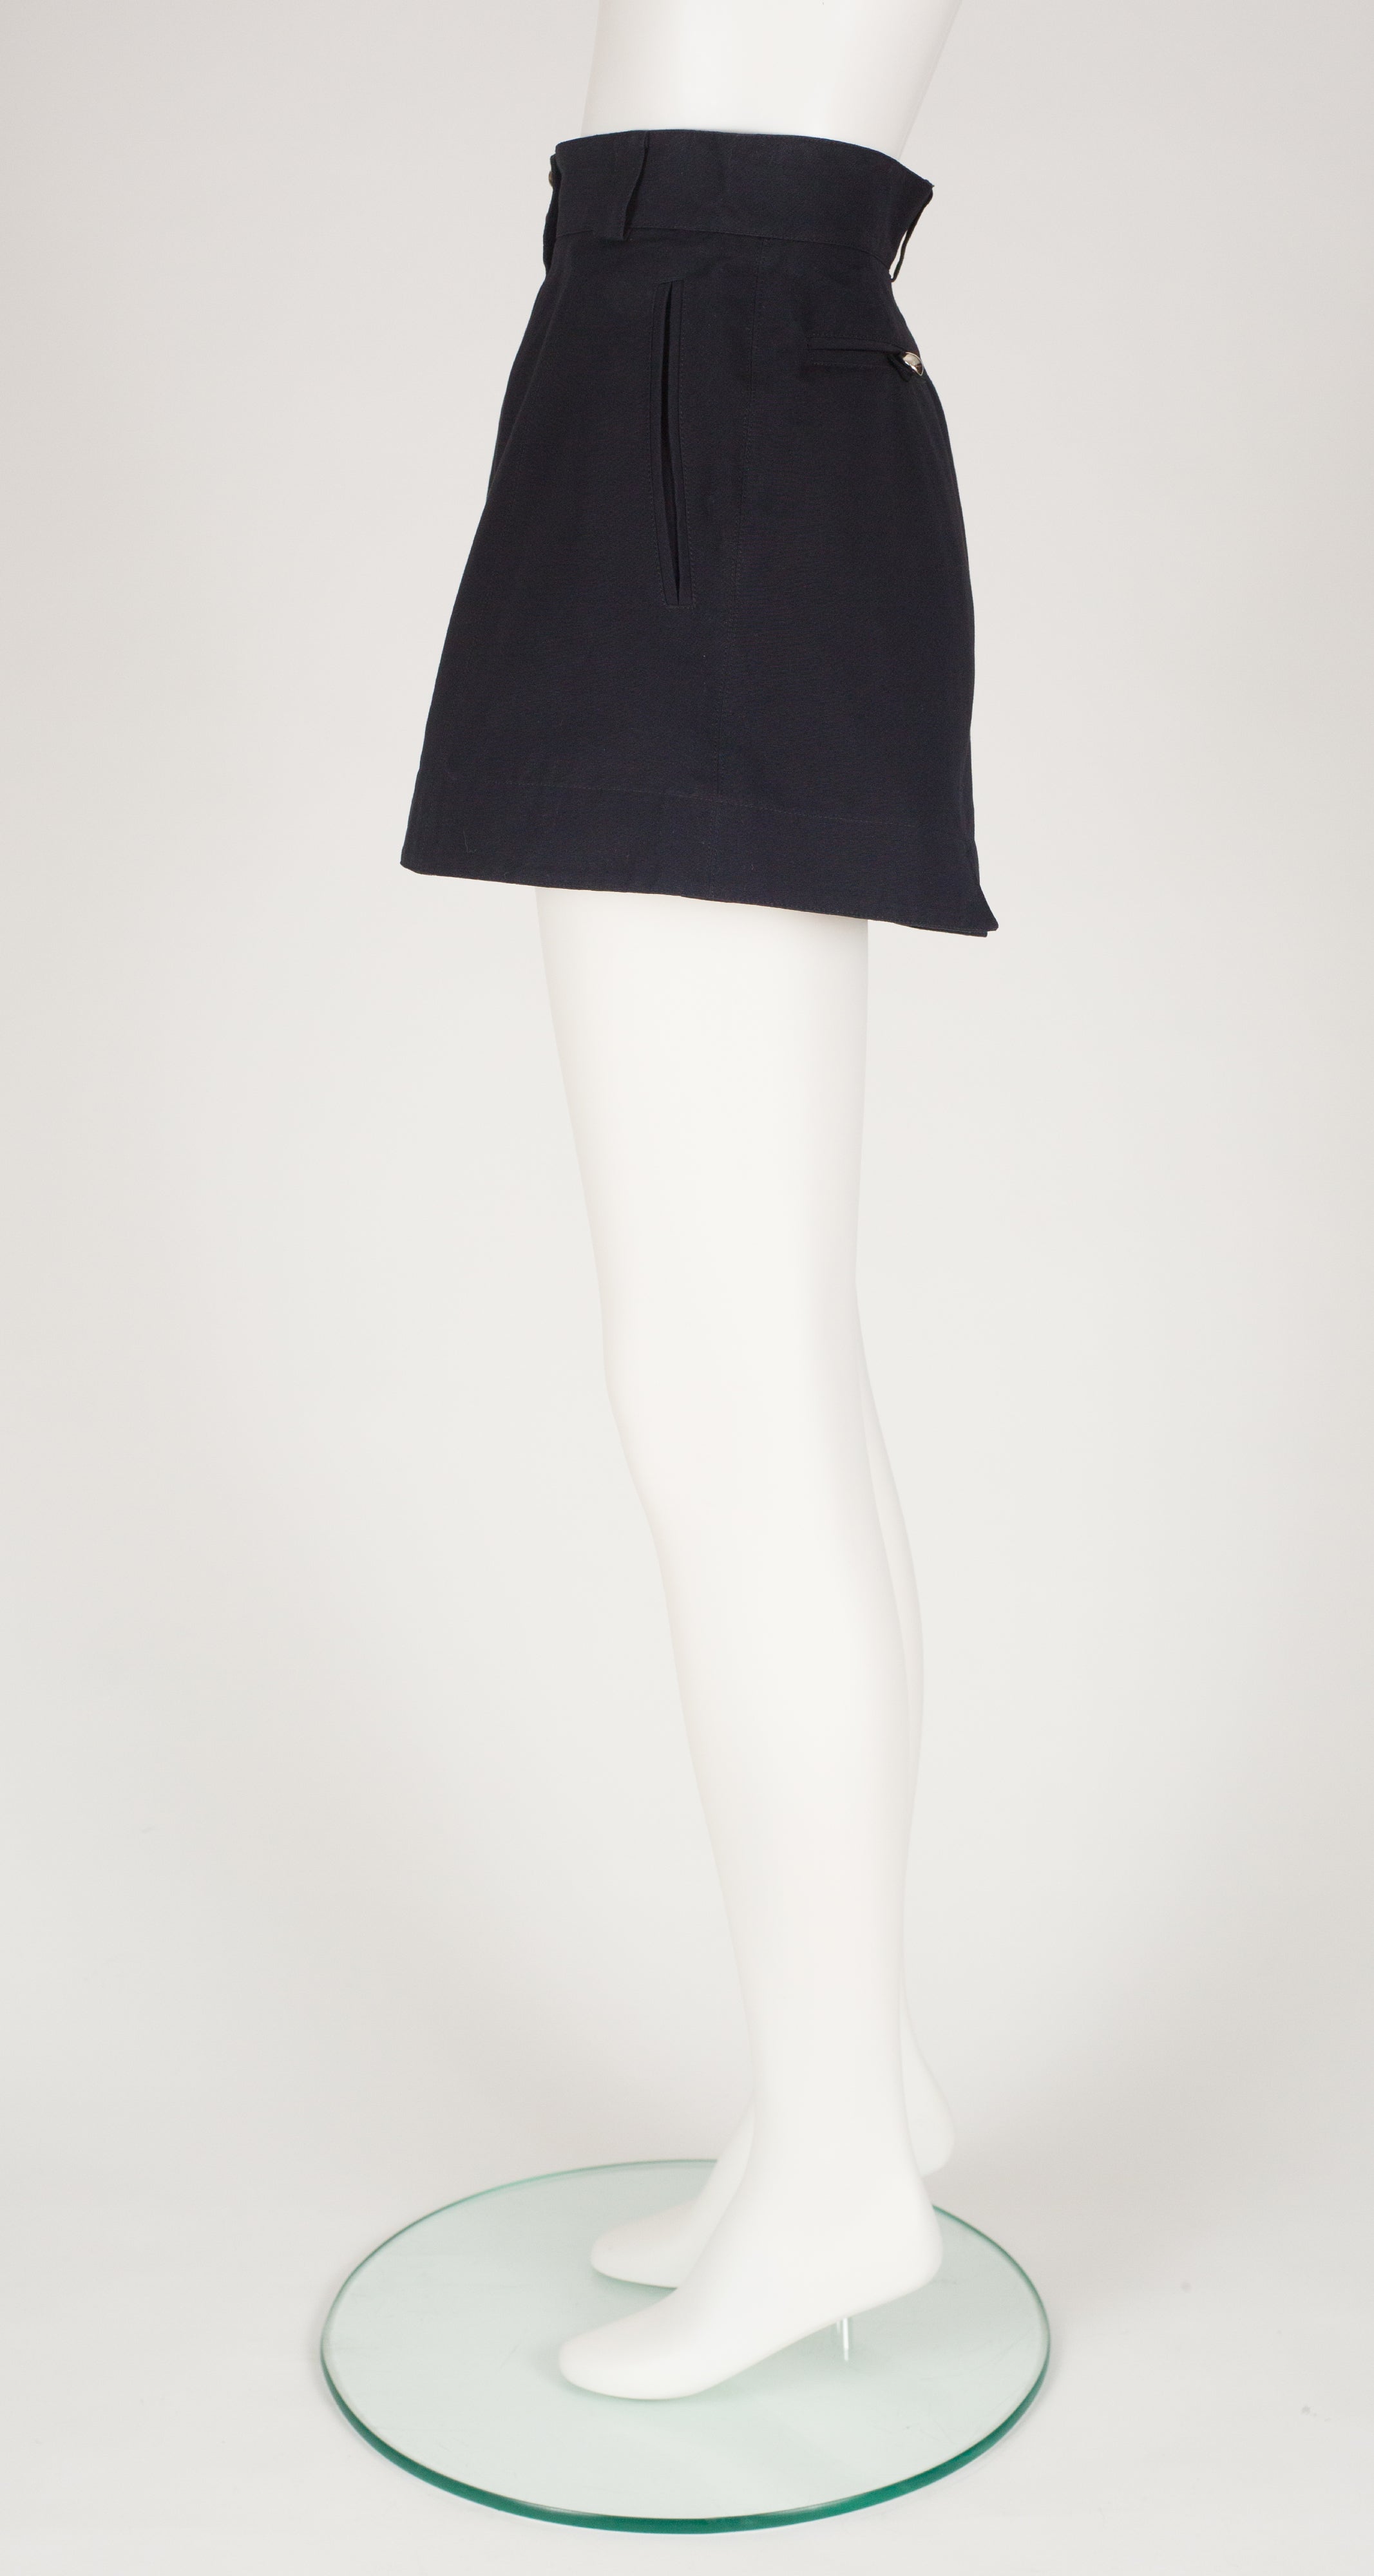 1991 S/S Structured Black Cotton High-Waisted Shorts